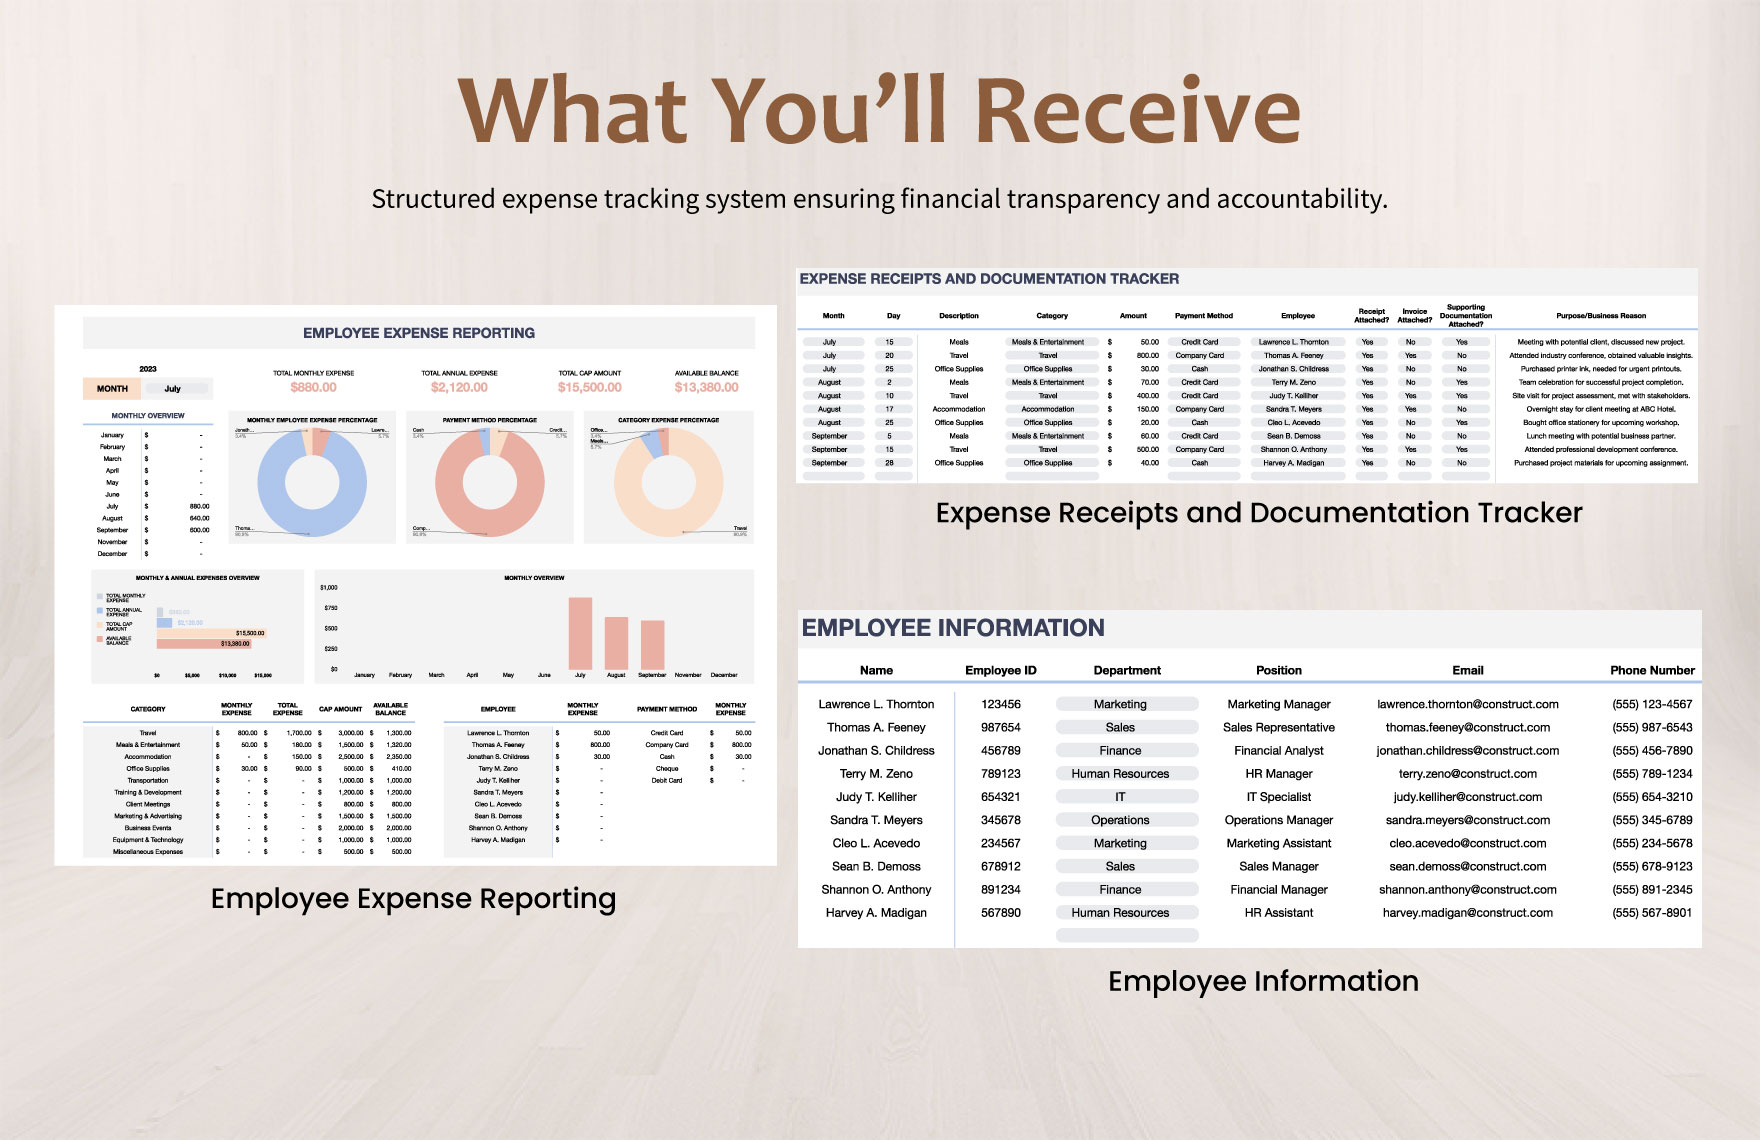 Employee Expense Reporting Template